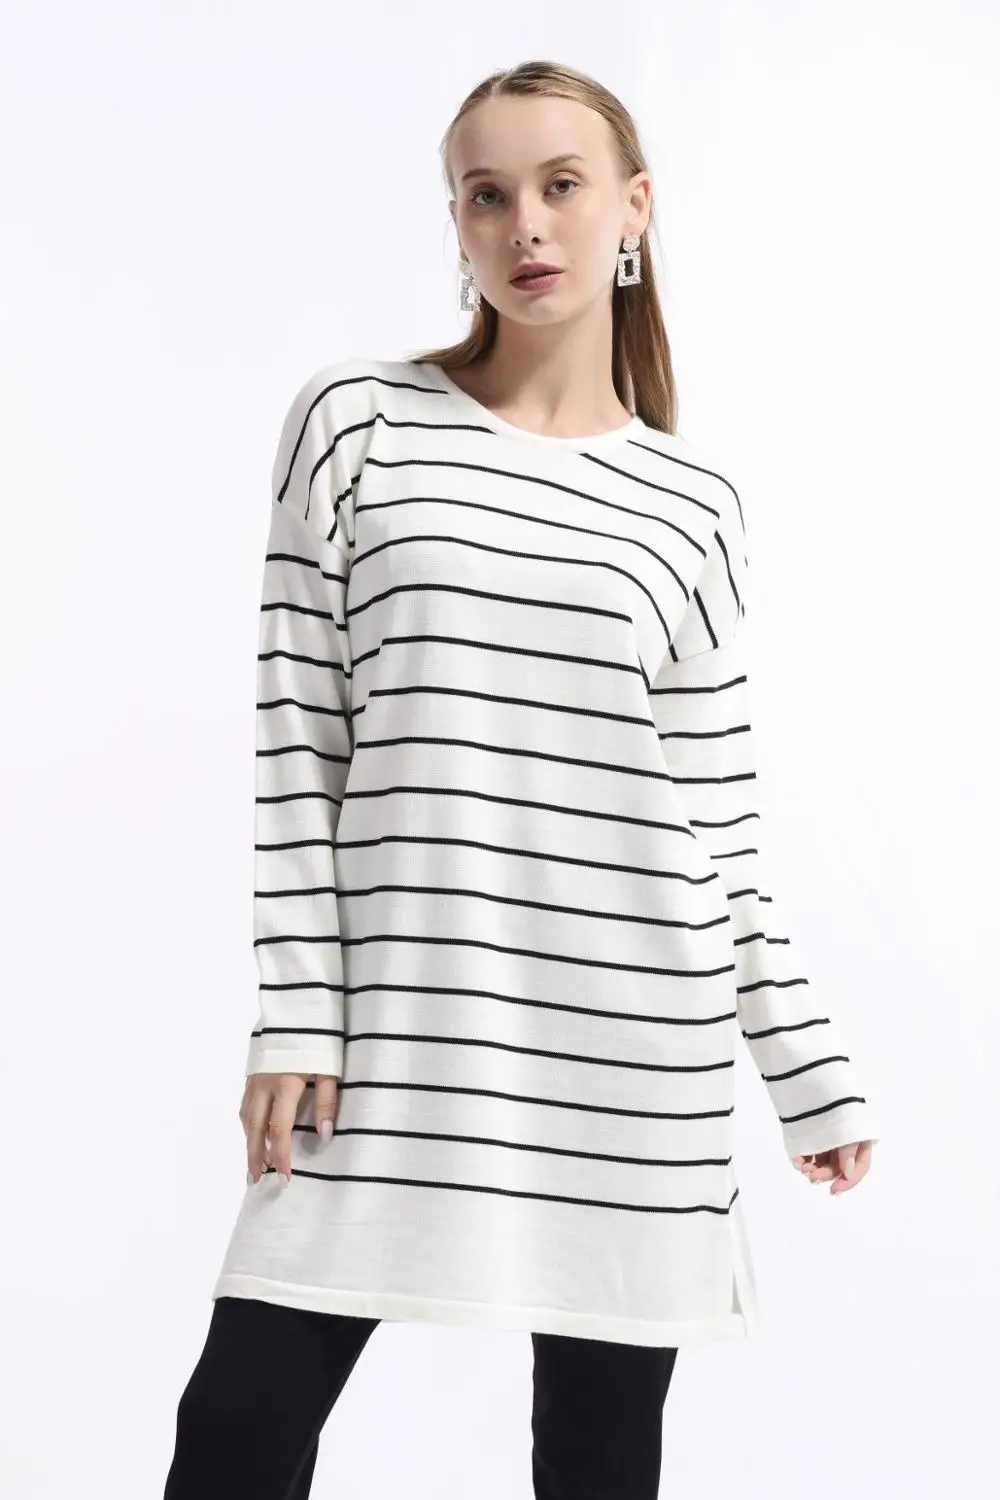 

Nefise Fashion 2020 Knitted Woman Long Stripped Crew Neck Sweater Tunic for winter Autumn Black White